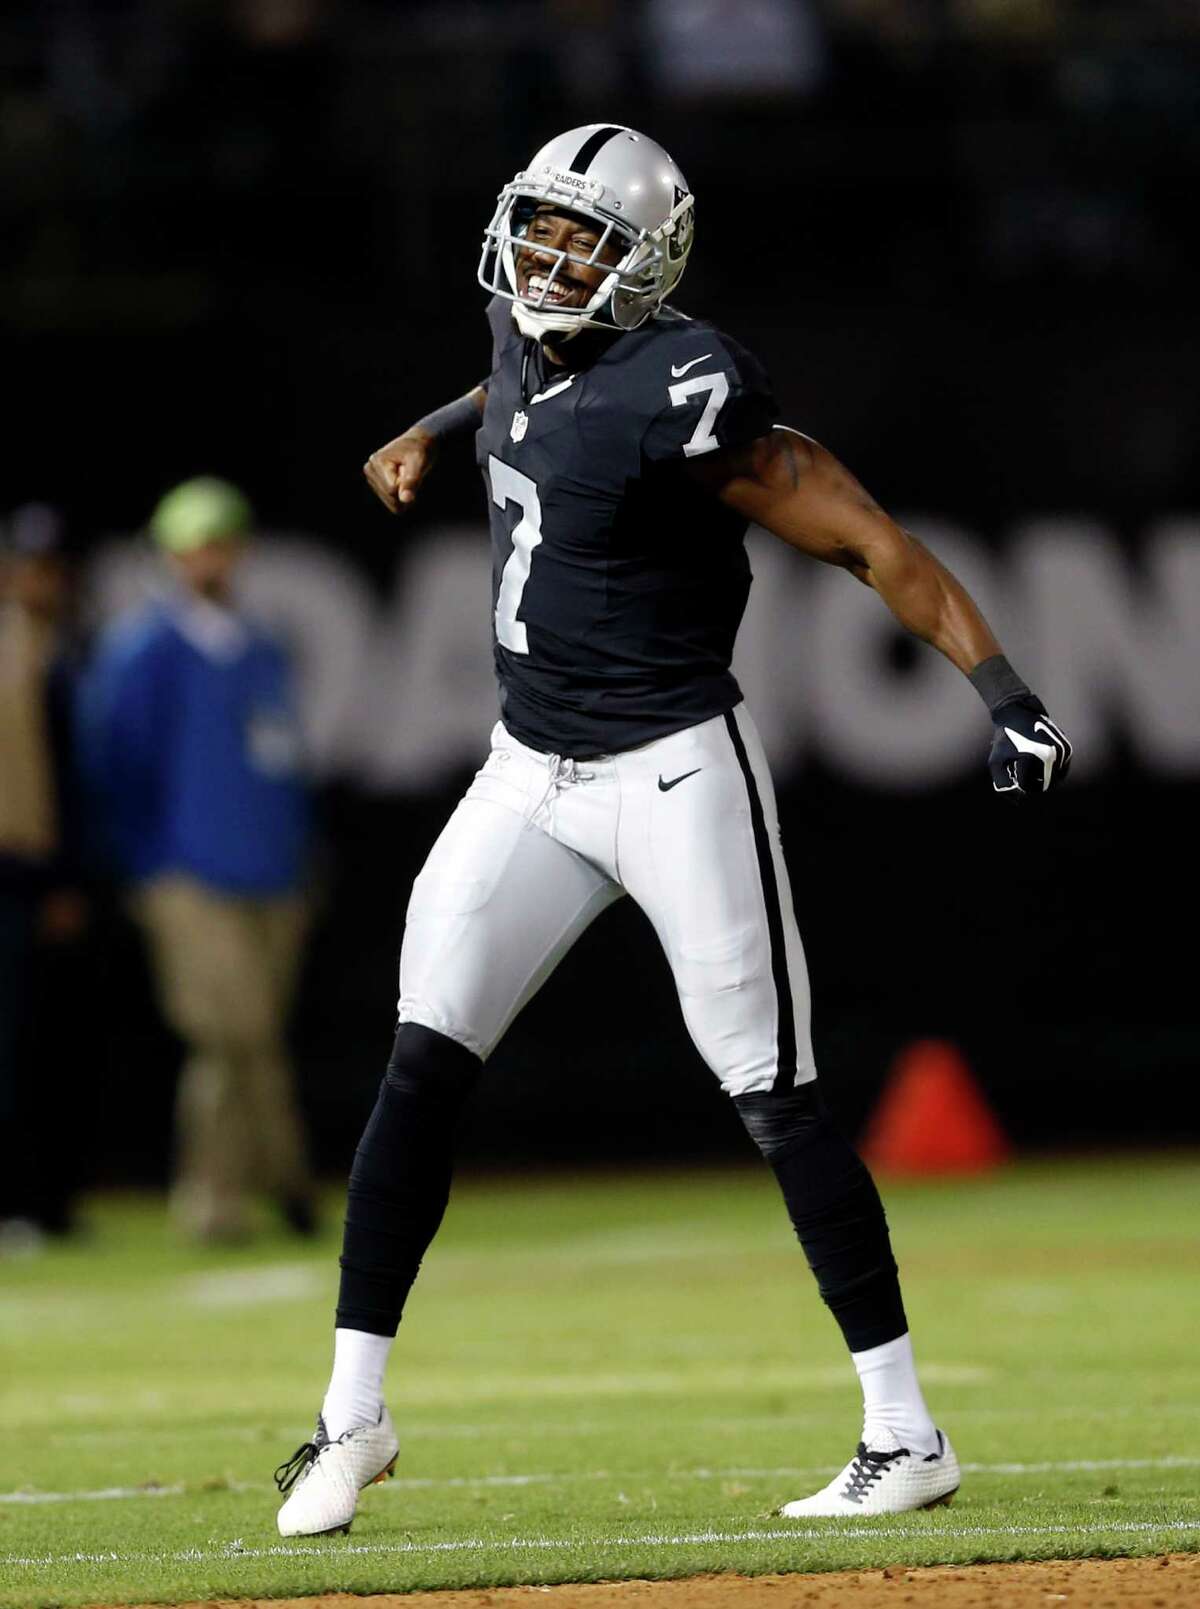 Oakland Raiders' punter Marquette King celebrates a punt downed inside the 10 yard line in 2nd quarter against Seattle Seahawks during NFL preseason game at the Oakland Coliseum in Oakland, Calif., on Wednesday, September 1, 2016.